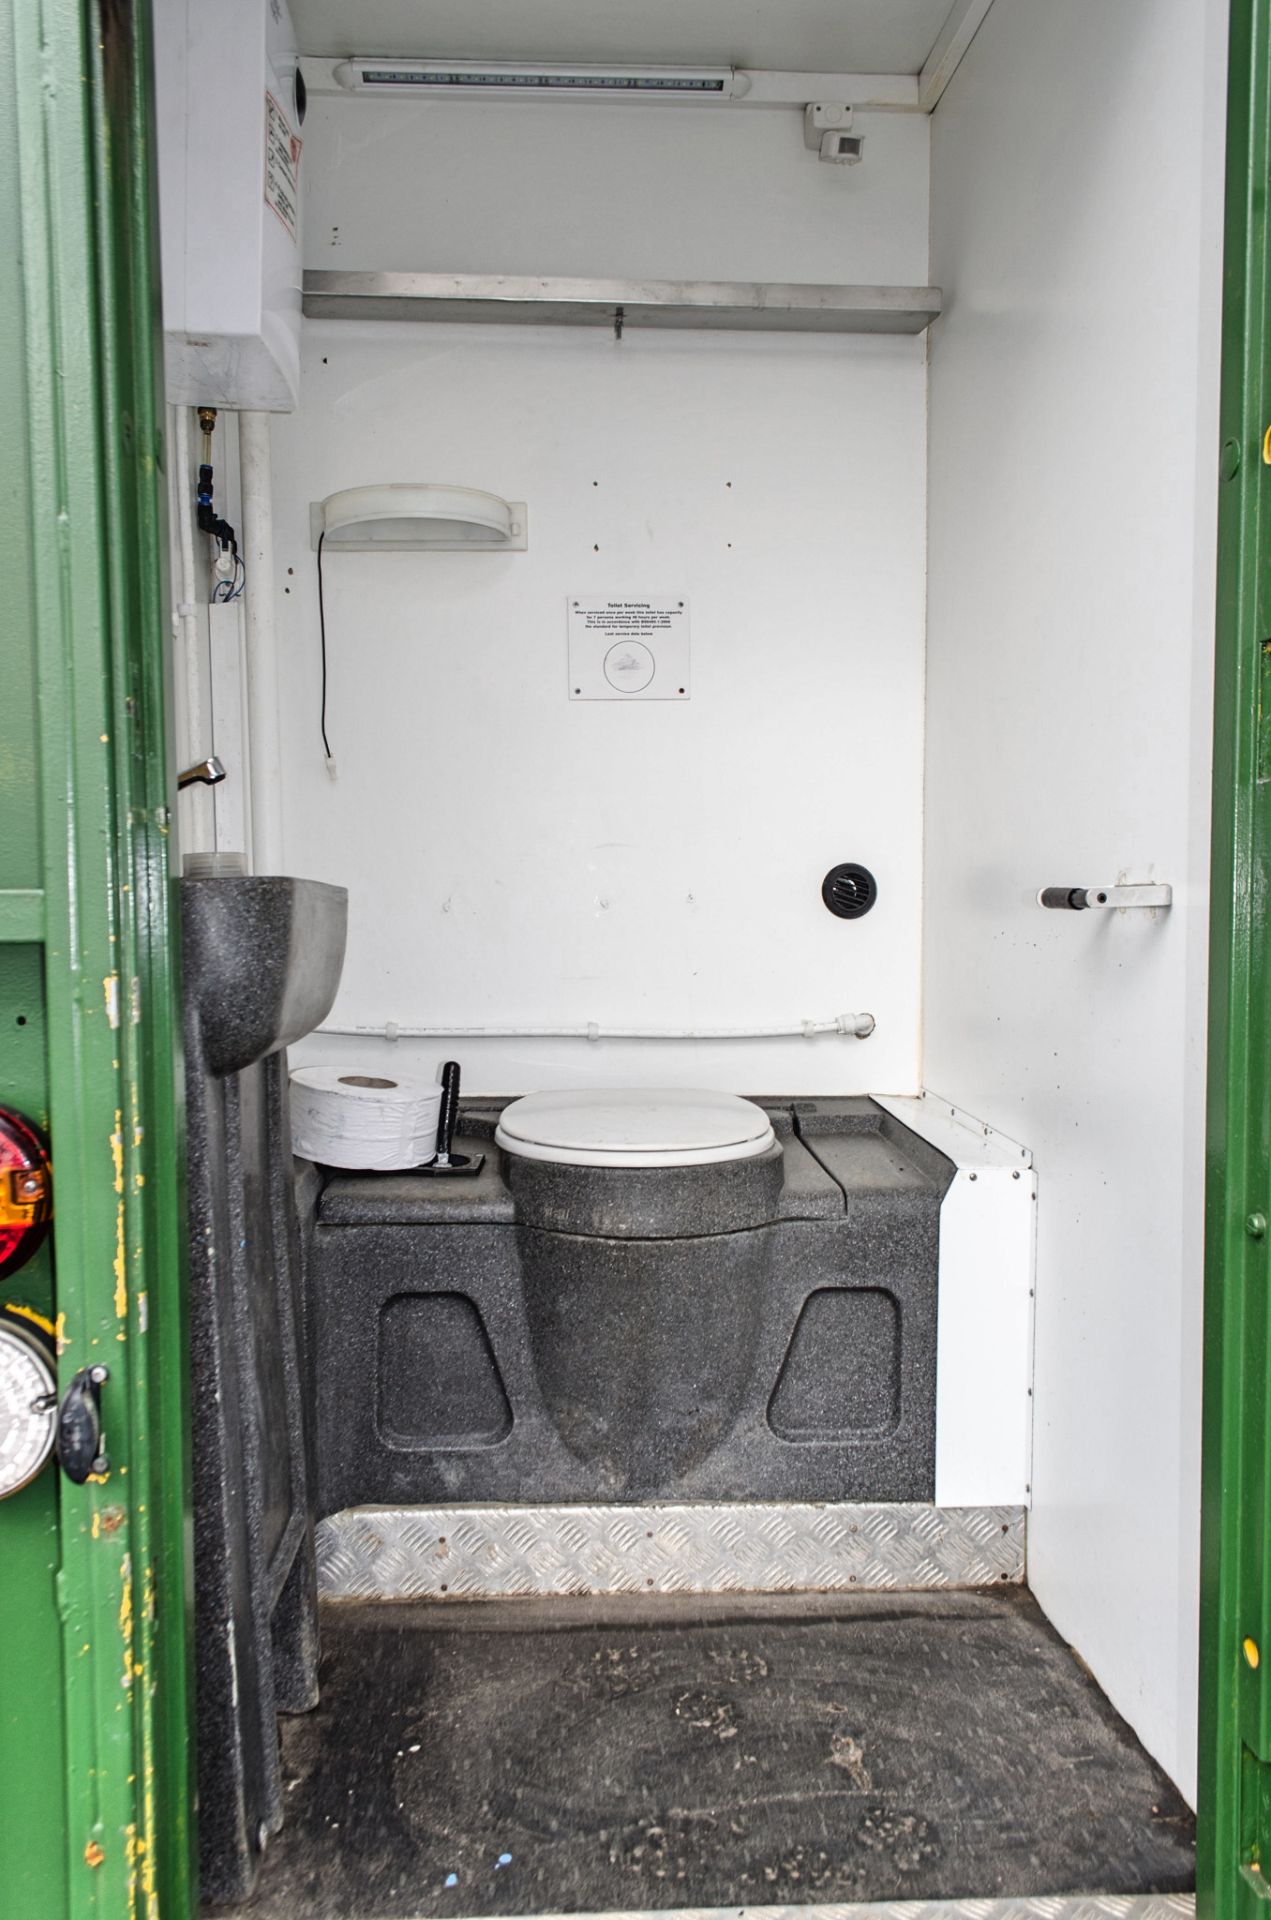 12 ft x 7 ft steel anti vandal mobile welfare site unit Comprising of: canteen, toilet & generator - Image 7 of 8